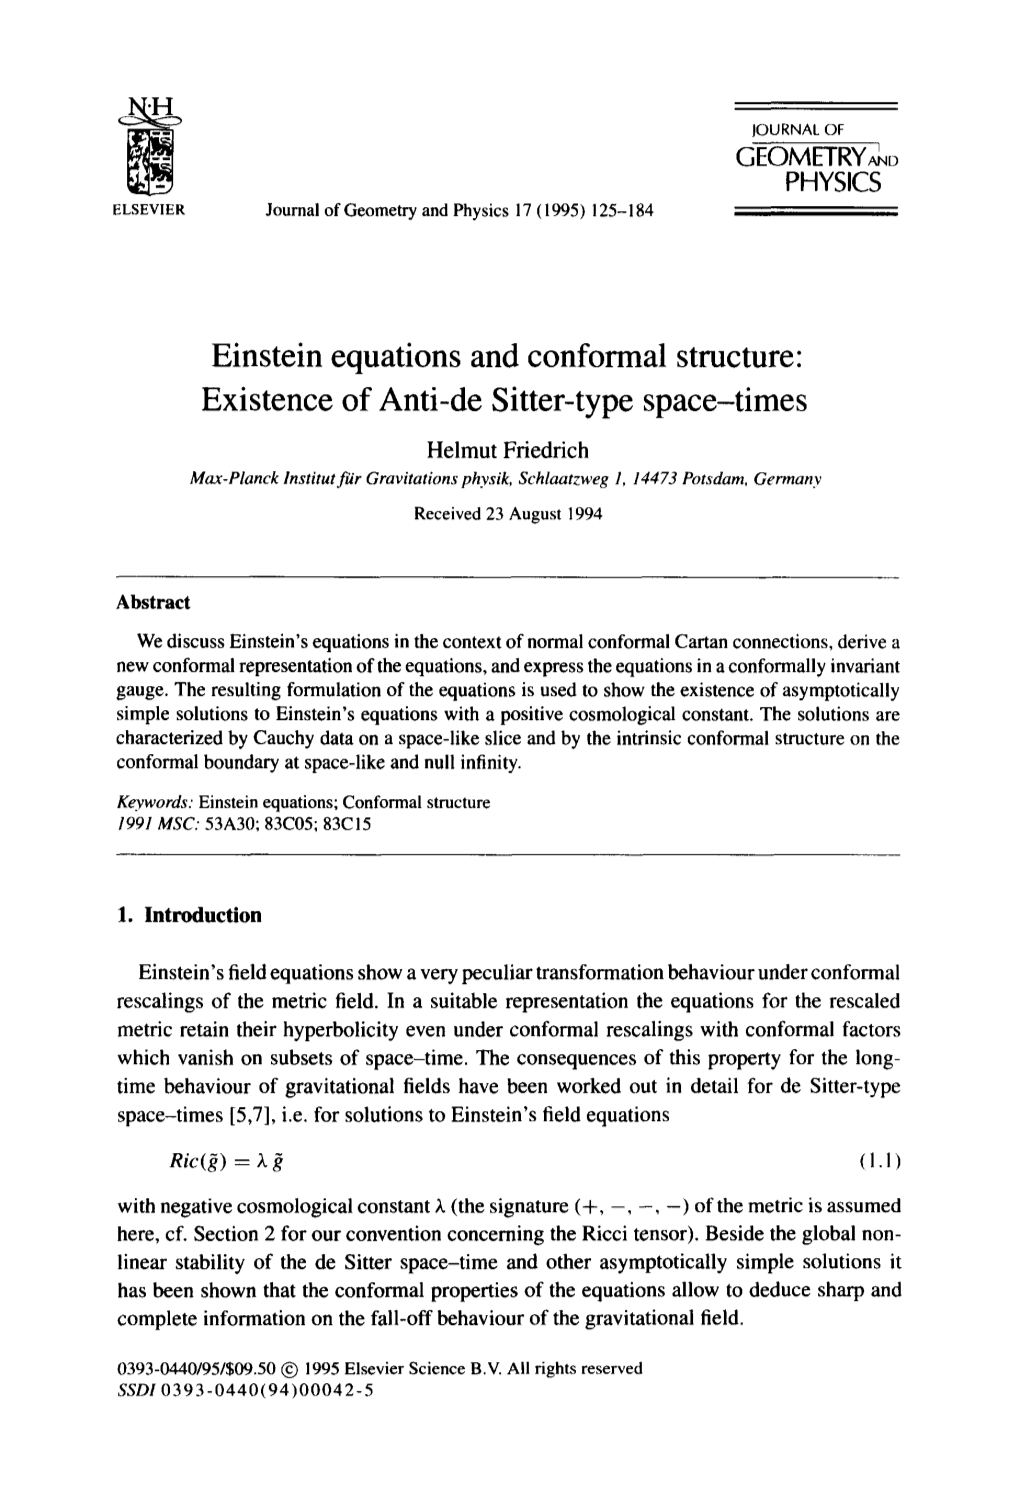 Einstein Equations and Conformal Structure: Existence of Anti-De Sitter-Type Space-Times